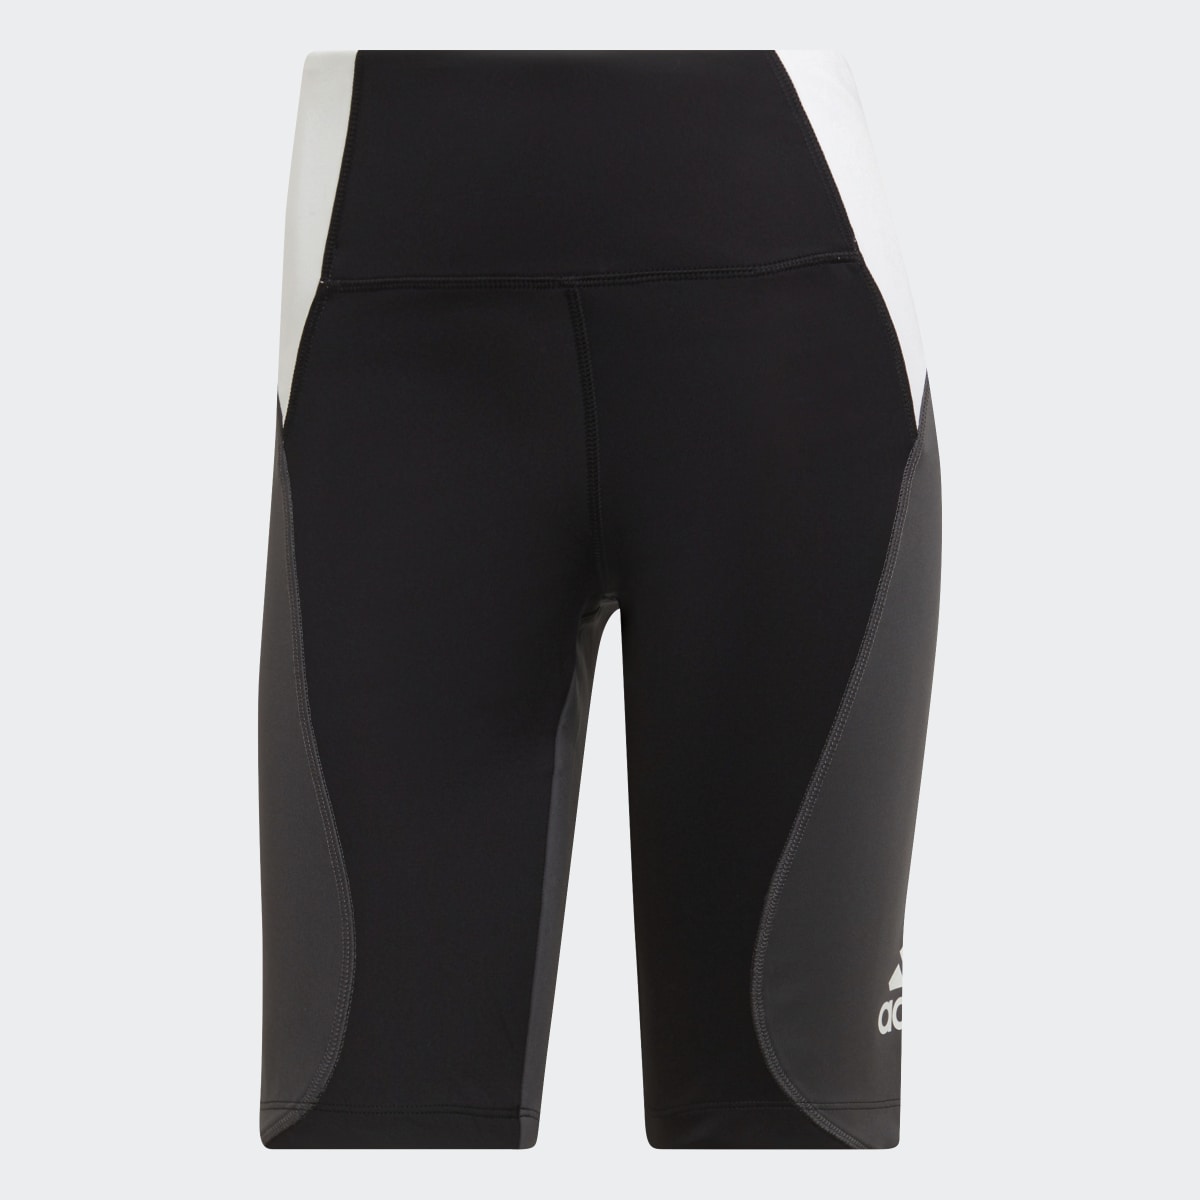 Adidas Designed to Move Colorblock Short Sport Tights. 5